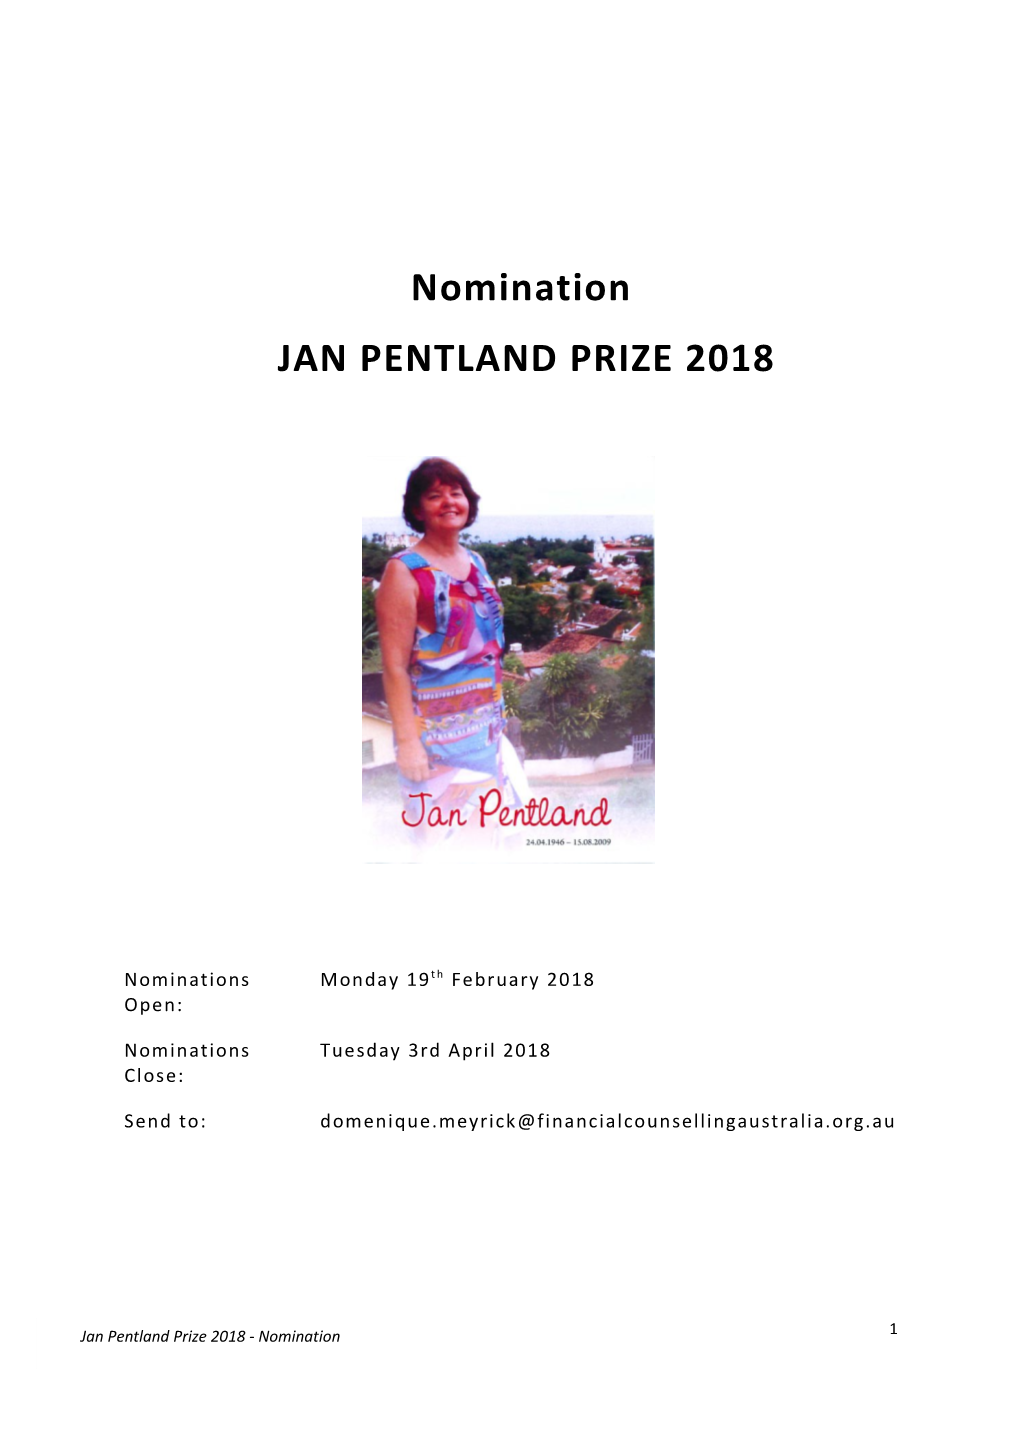 About the Jan Pentland Prize